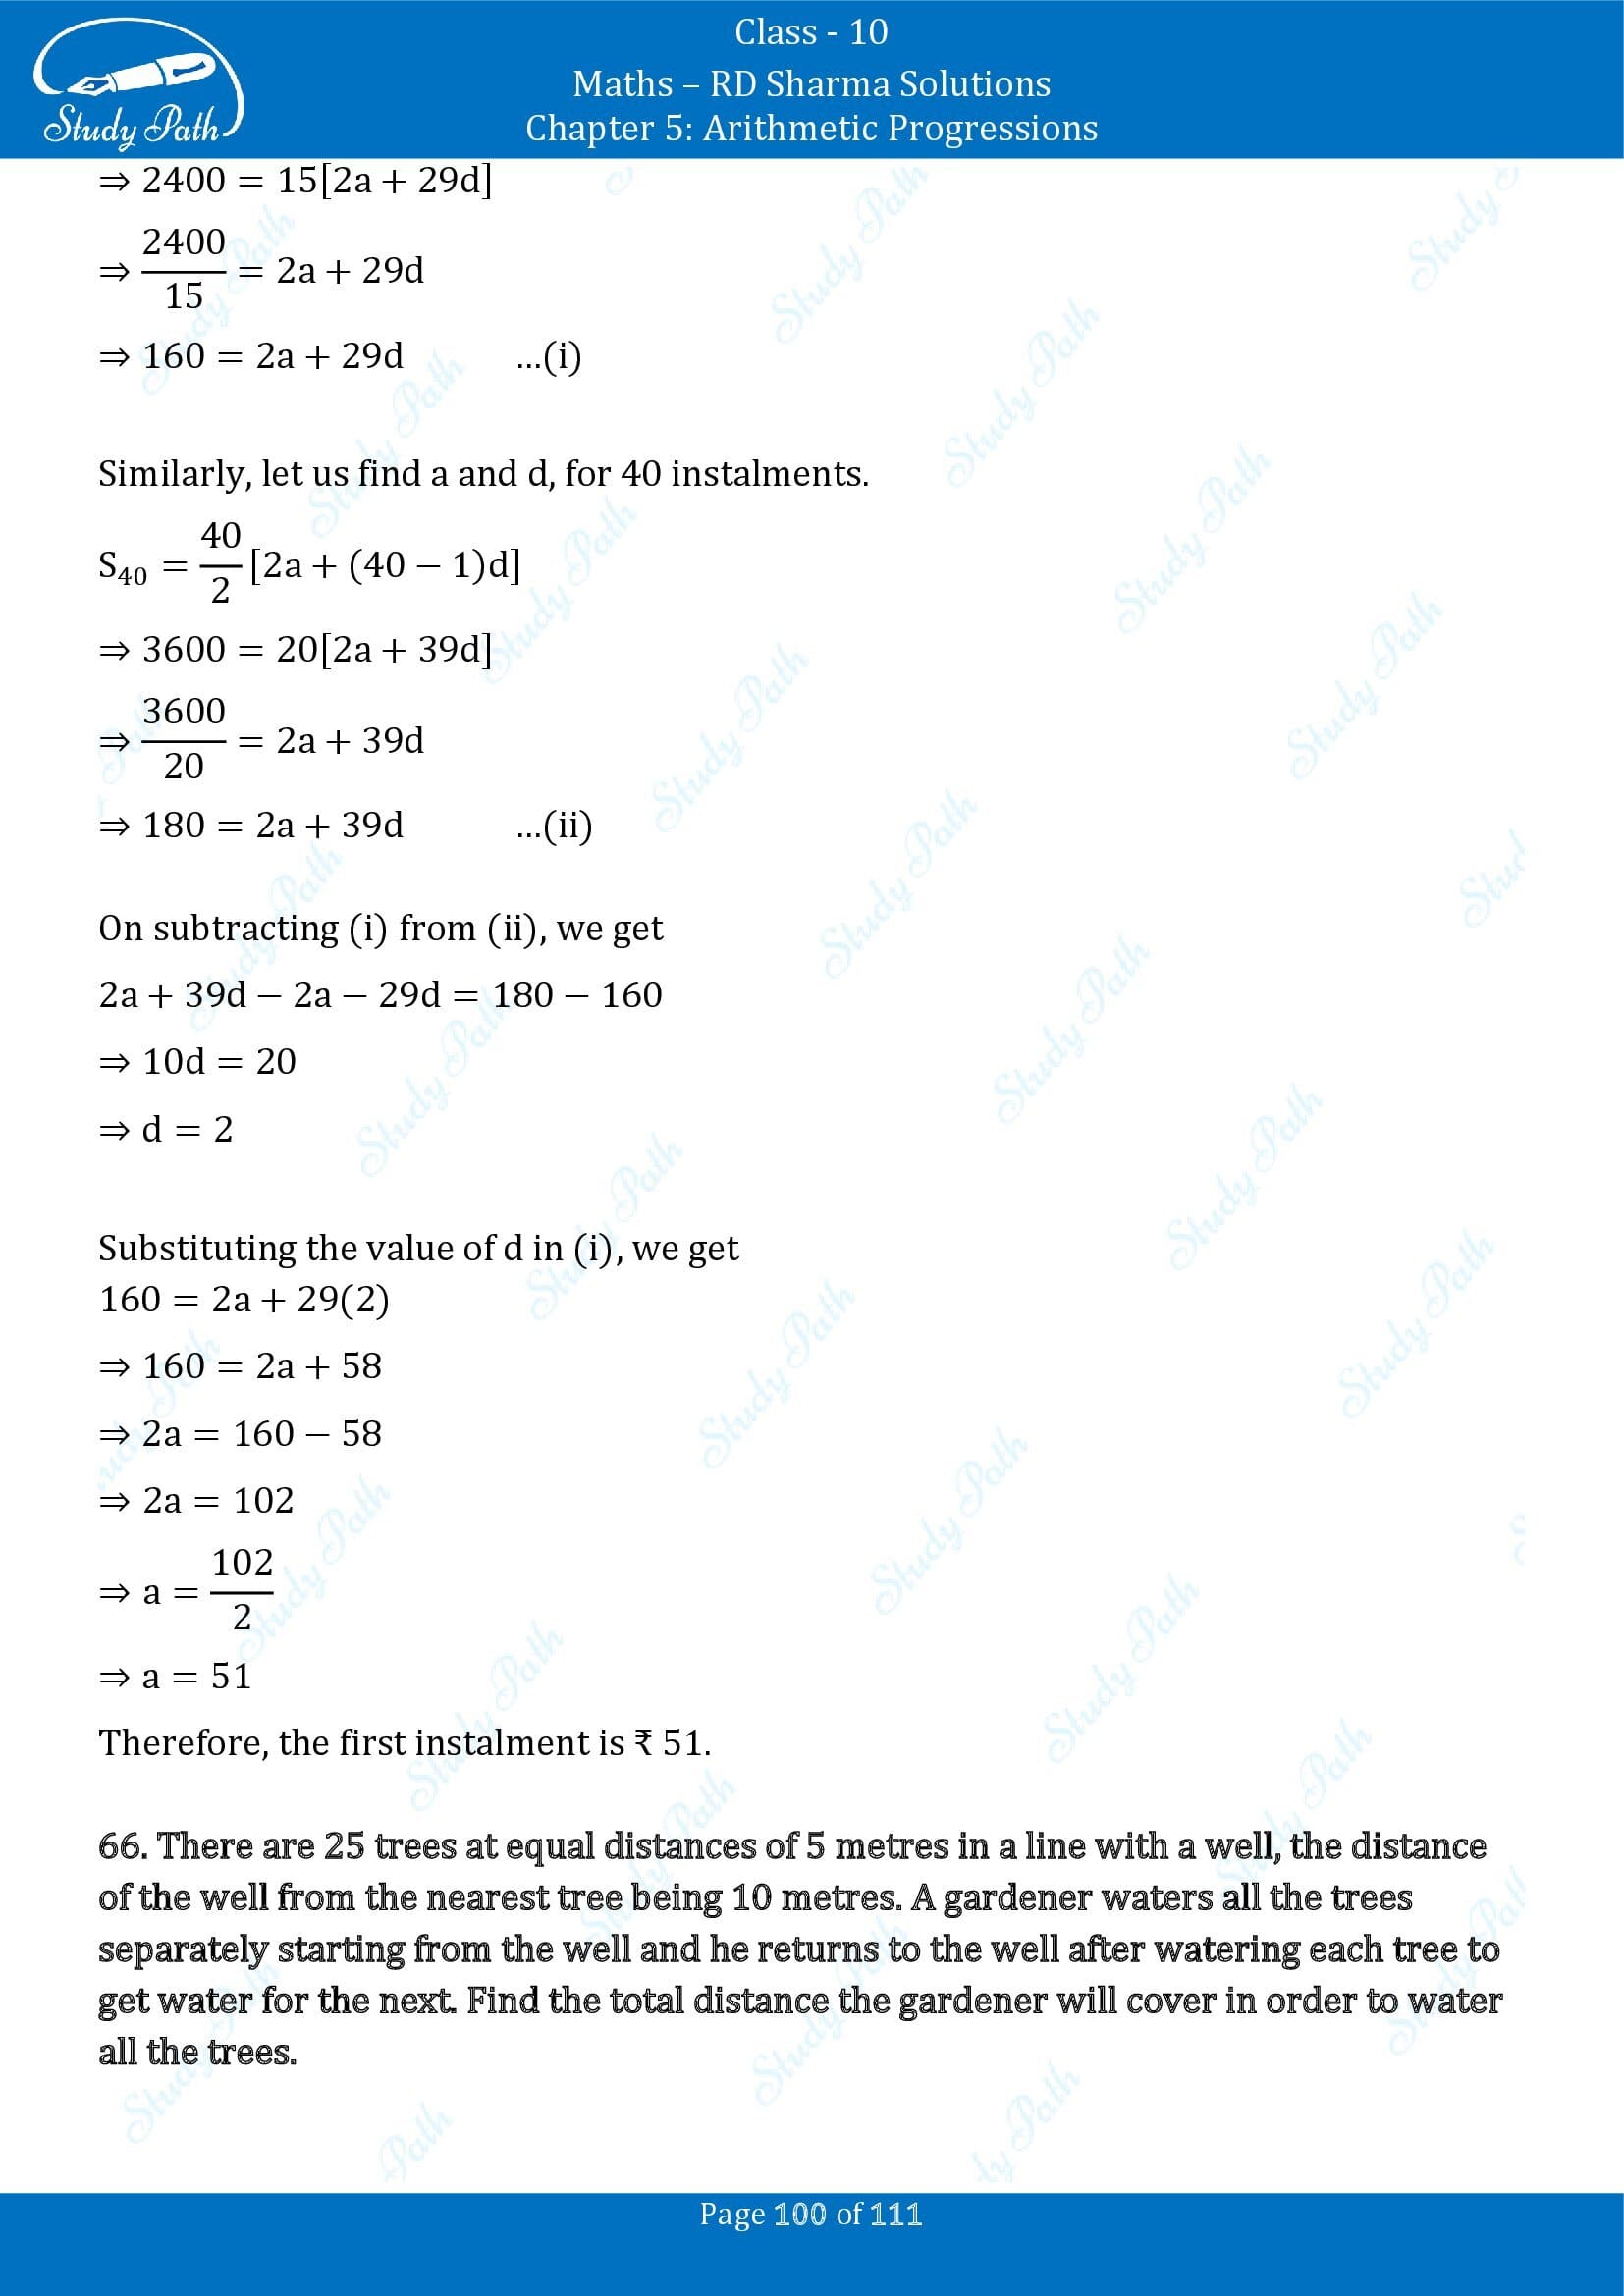 RD Sharma Solutions Class 10 Chapter 5 Arithmetic Progressions Exercise 5.6 00100